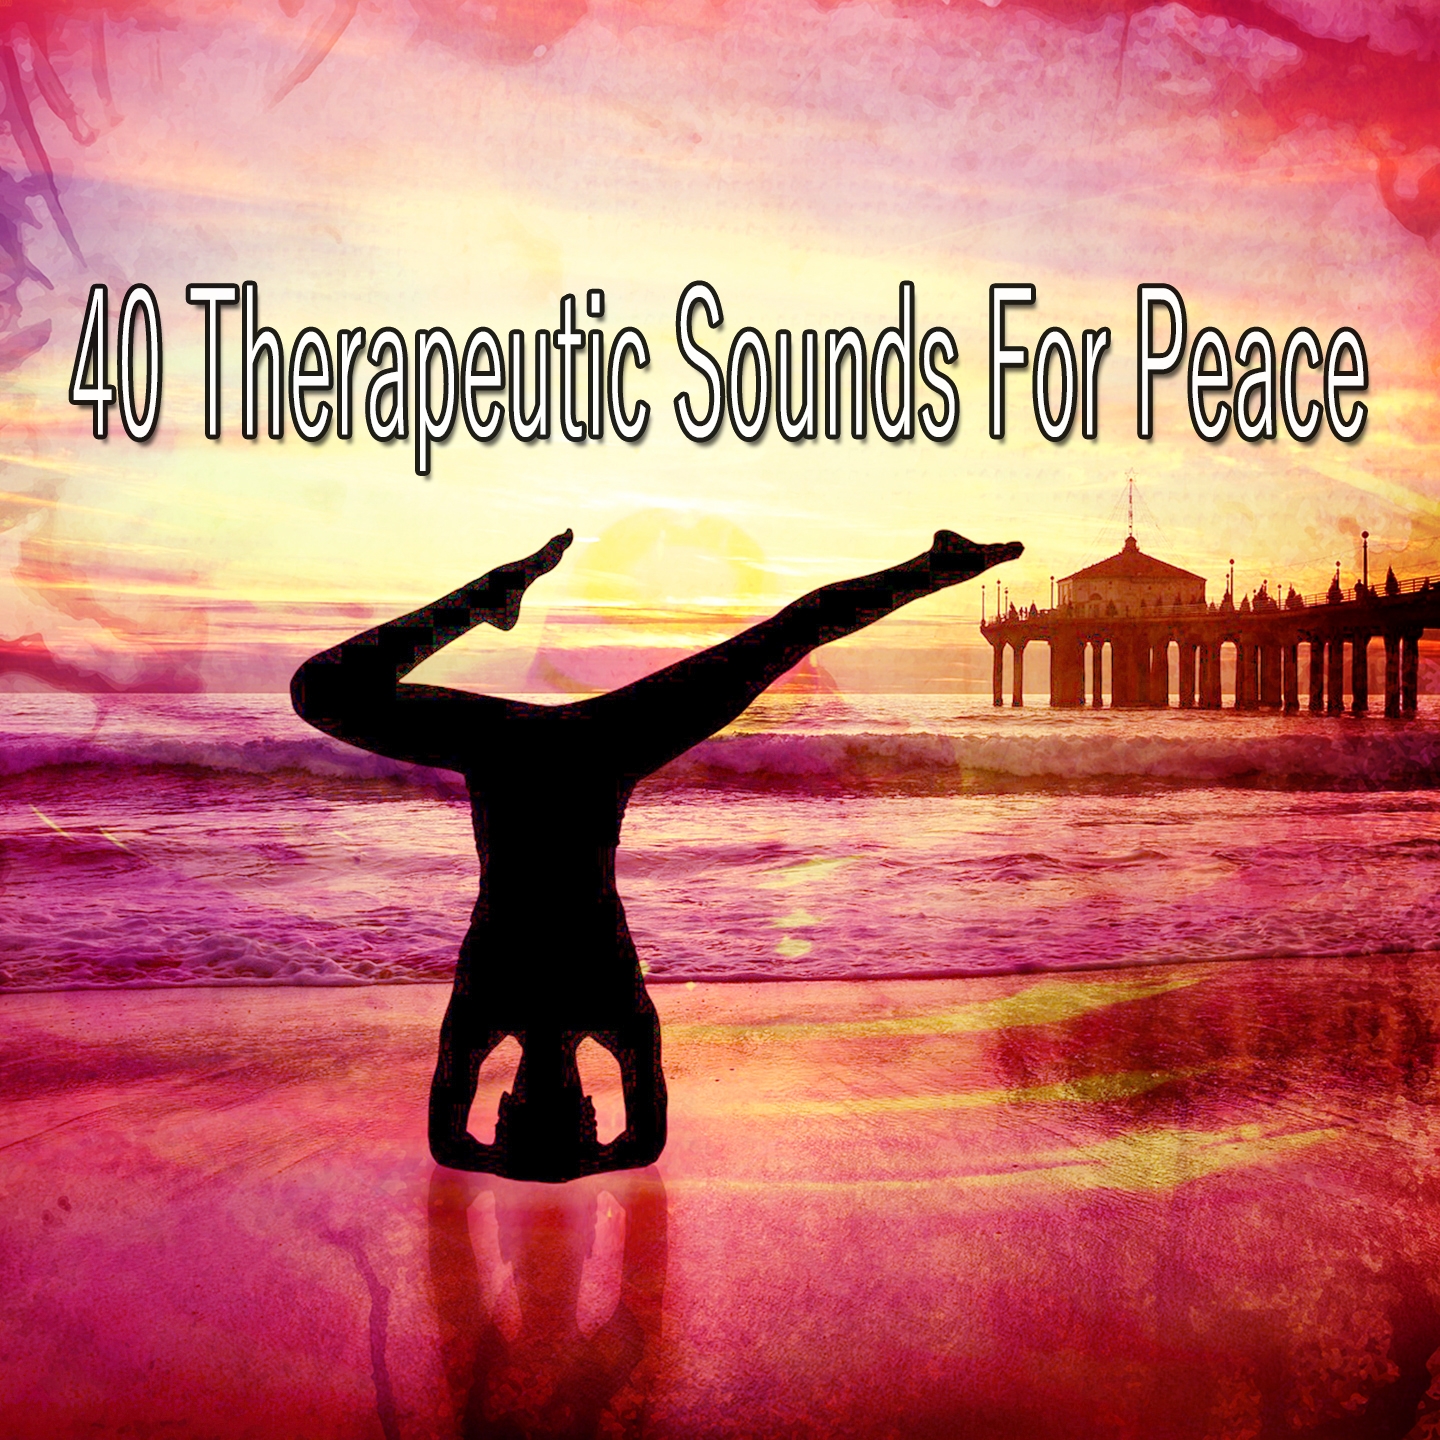 40 Therapeutic Sounds For Peace